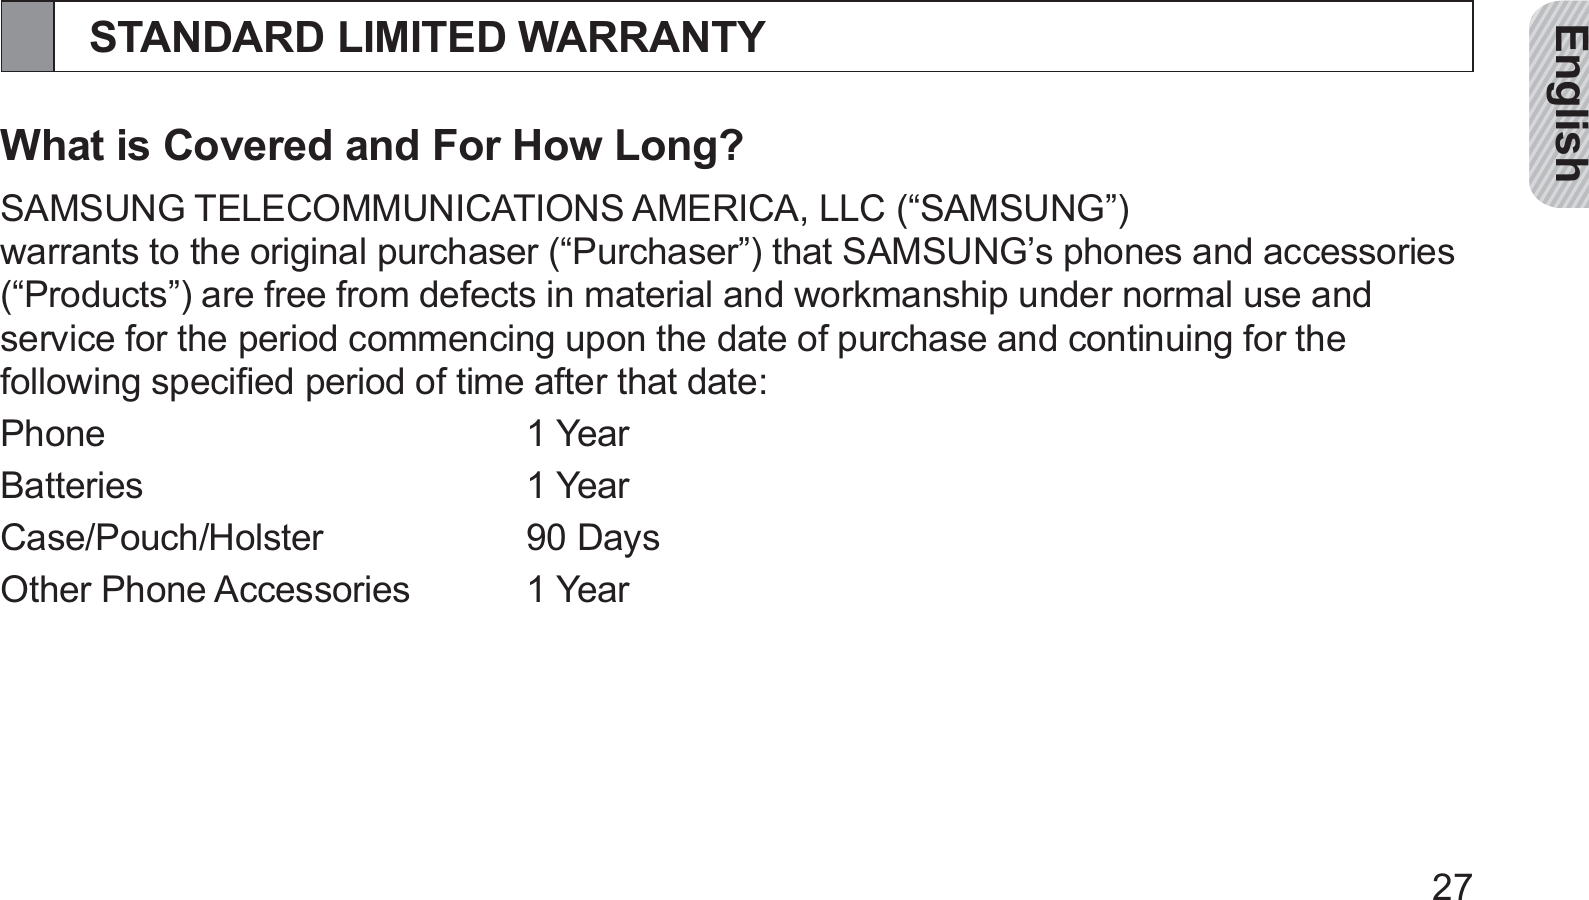 English27STANDARD LIMITED WARRANTYWhat is Covered and For How Long?SAMSUNG TELECOMMUNICATIONS AMERICA, LLC (“SAMSUNG”) warrants to the original purchaser (“Purchaser”) that SAMSUNG’s phones and accessories (“Products”) are free from defects in material and workmanship under normal use and service for the period commencing upon the date of purchase and continuing for the following speciﬁed period of time after that date:Phone 1 YearBatteries 1 YearCase/Pouch/Holster 90 DaysOther Phone Accessories  1 Year